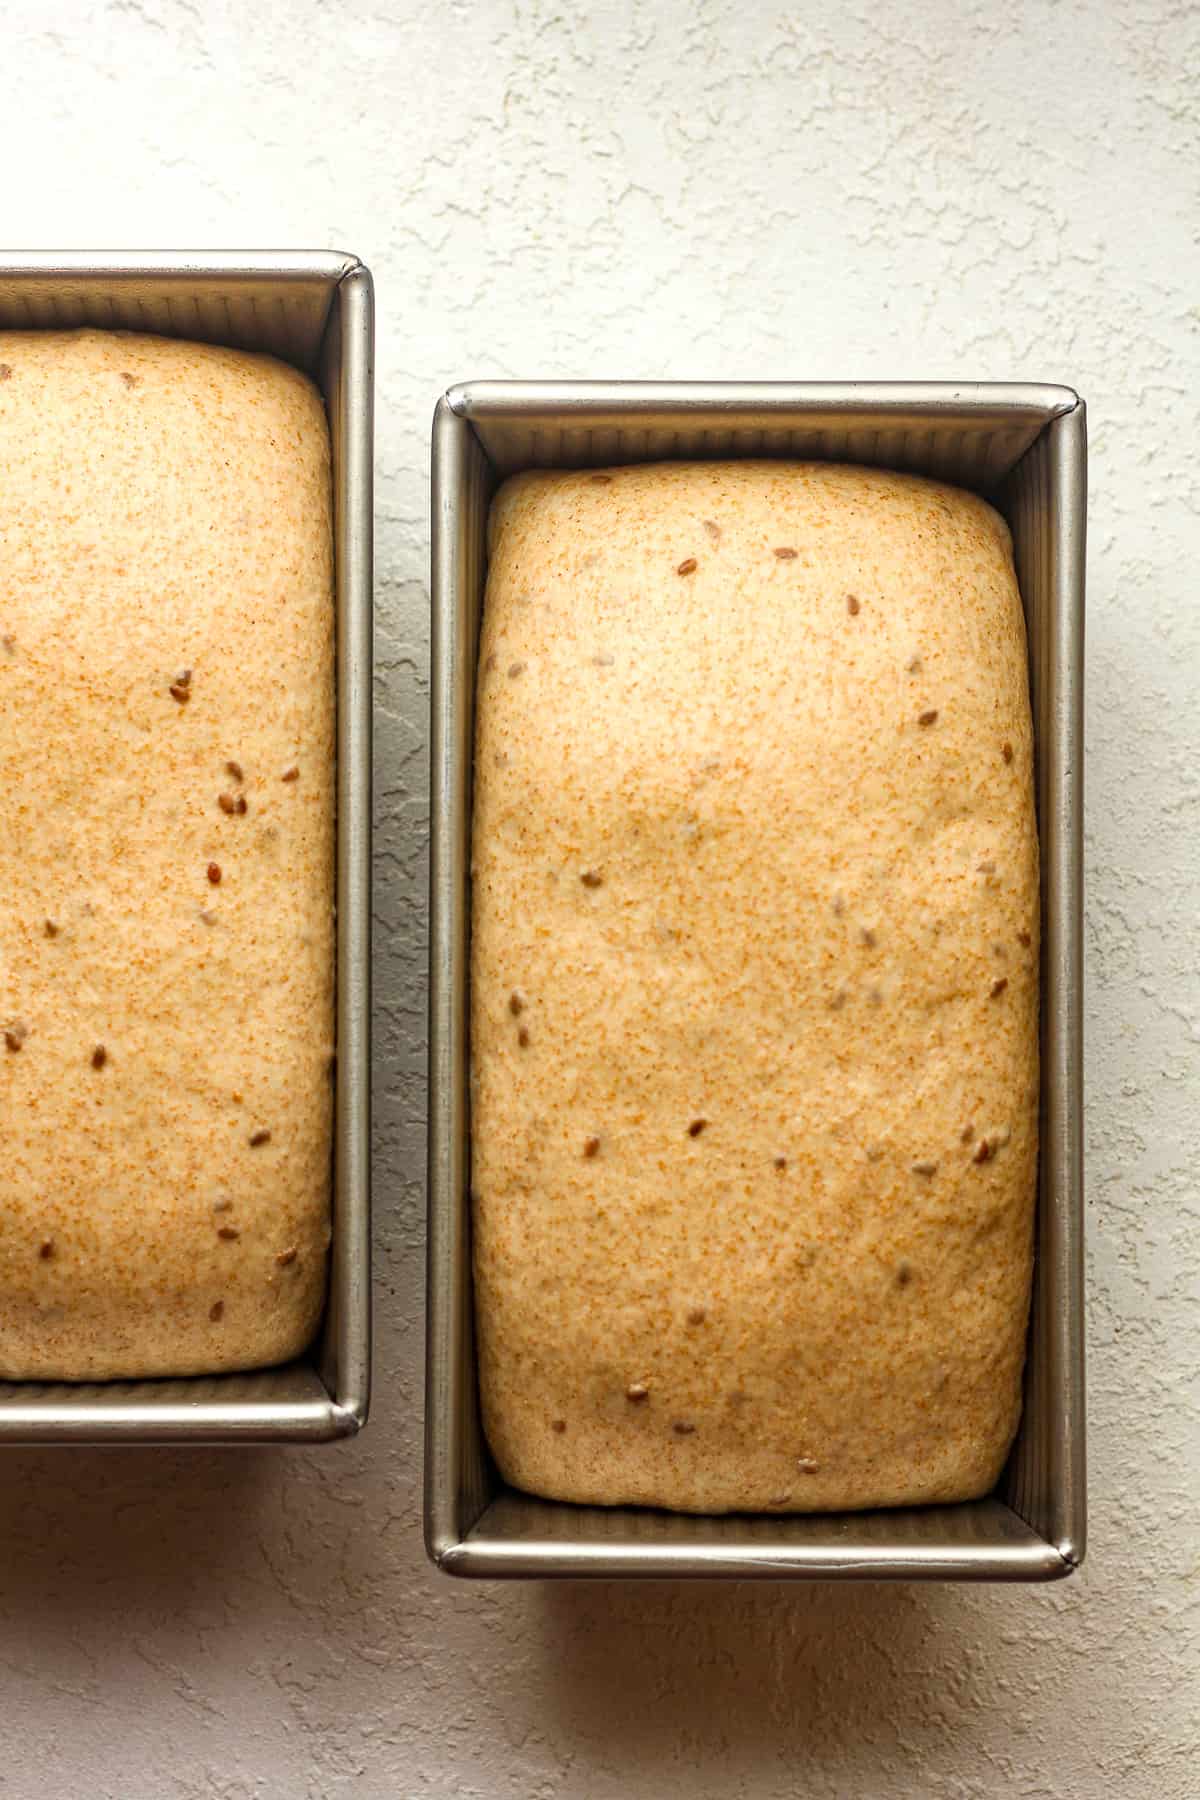 Two loaf pans of raised bread.